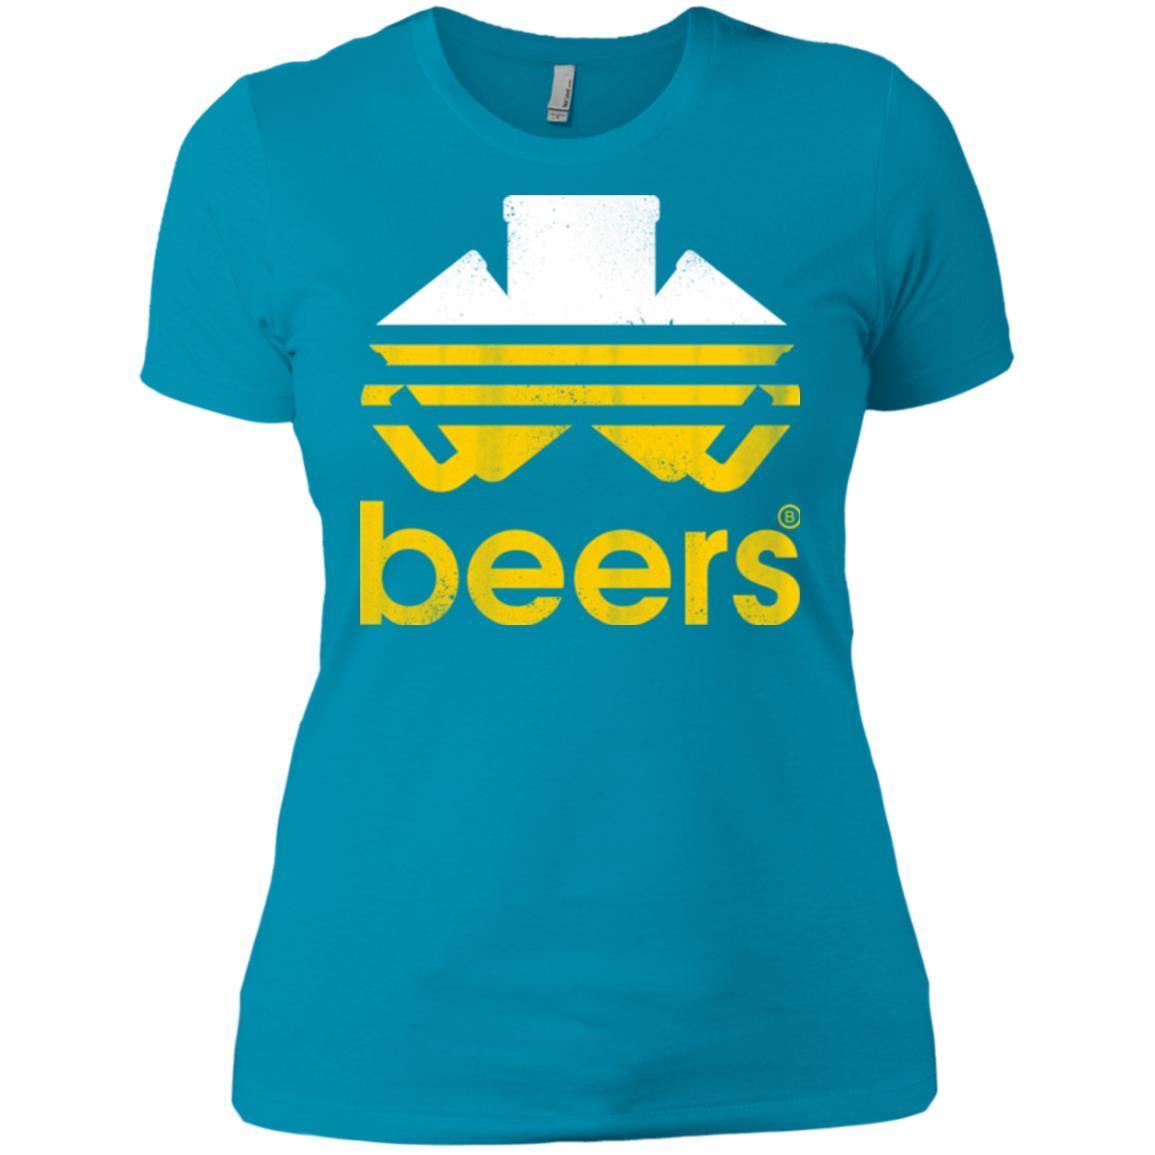 T-Shirts Turquoise / X-Small Beers Women's Premium T-Shirt